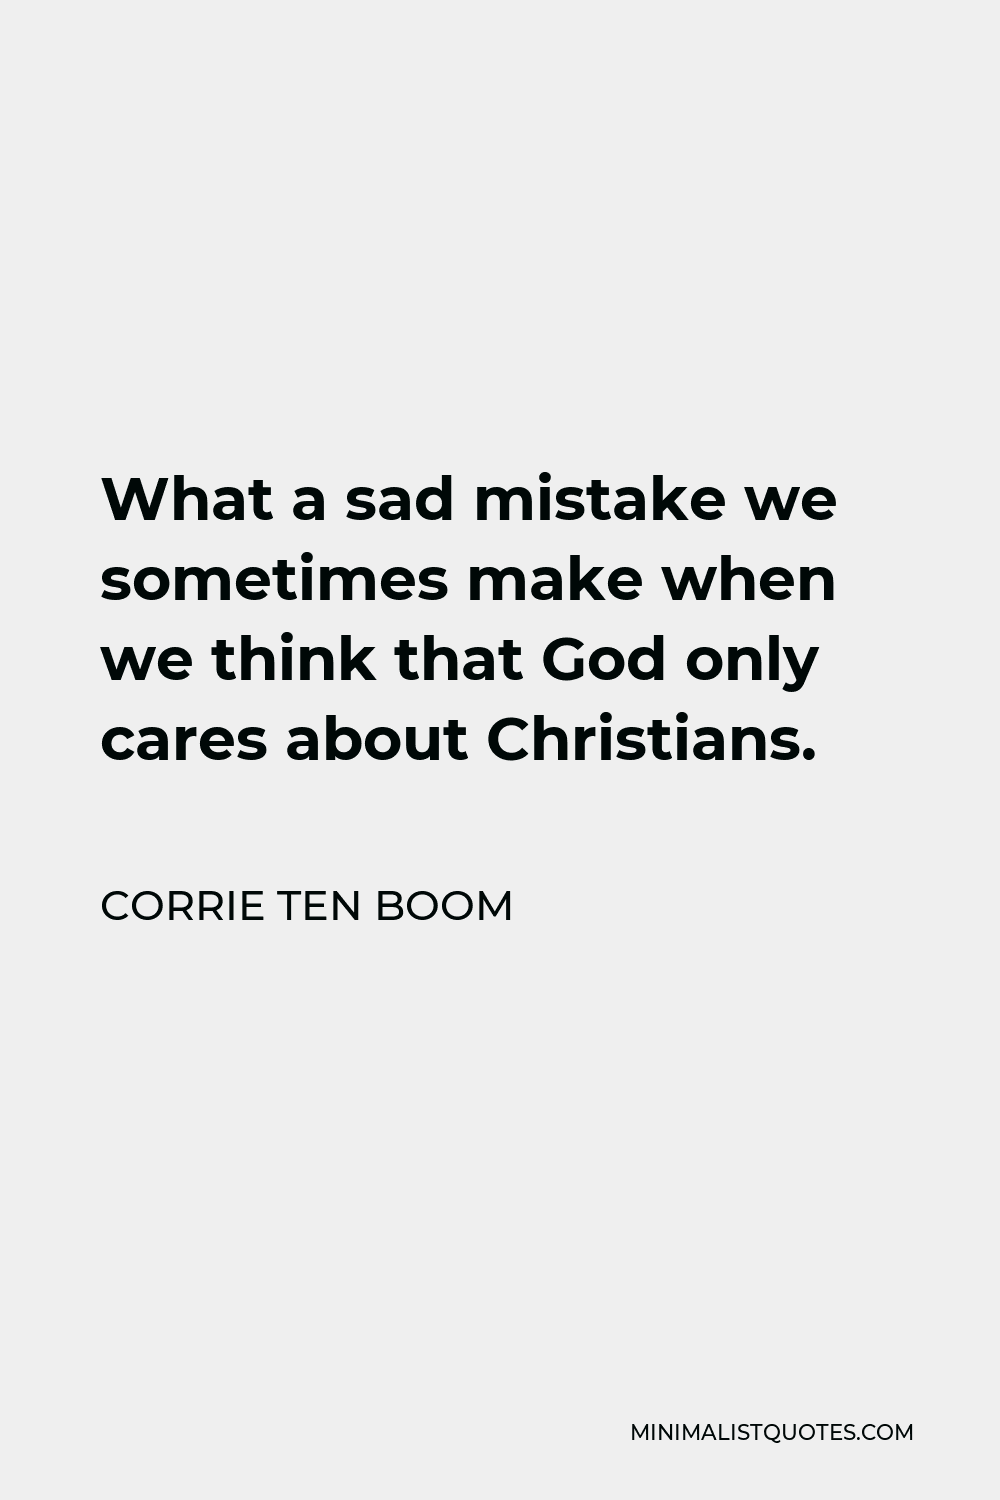 Corrie ten Boom Quote - What a sad mistake we sometimes make when we think that God only cares about Christians.